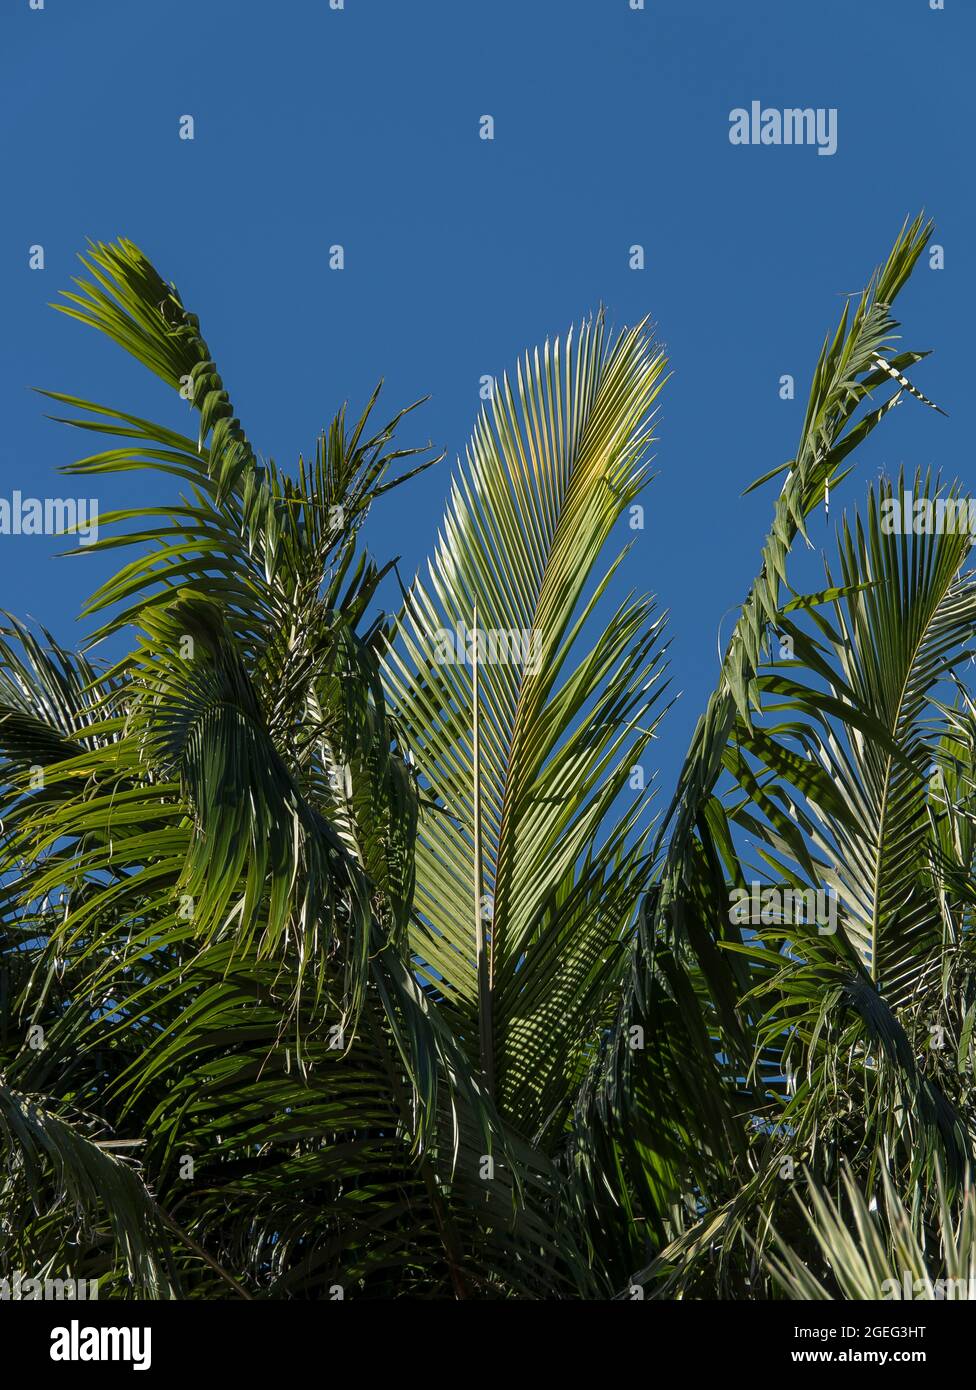 Green fronds of Bangalow palm trees (Archontophoenix cunninghamiana) against blue sky. Garden, Queensland, Australia. Copy space, background Stock Photo